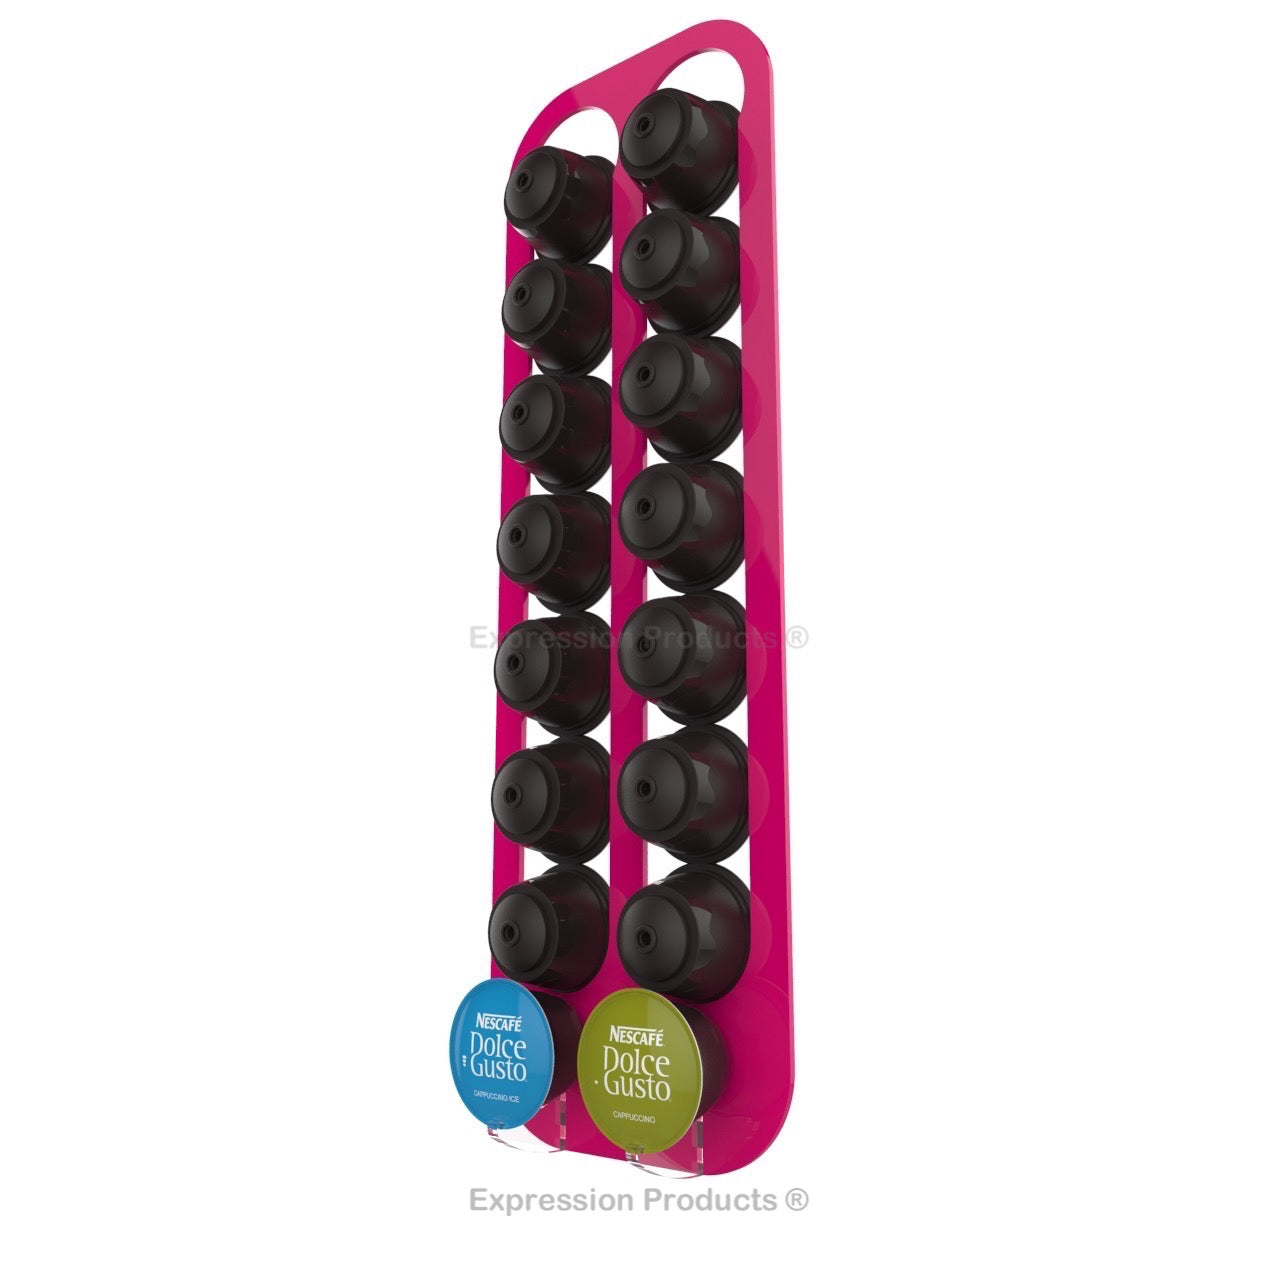 Dolce Gusto Coffee Pod Holder, Wall Mounted.  Shown in Pink Holding 16 Pods